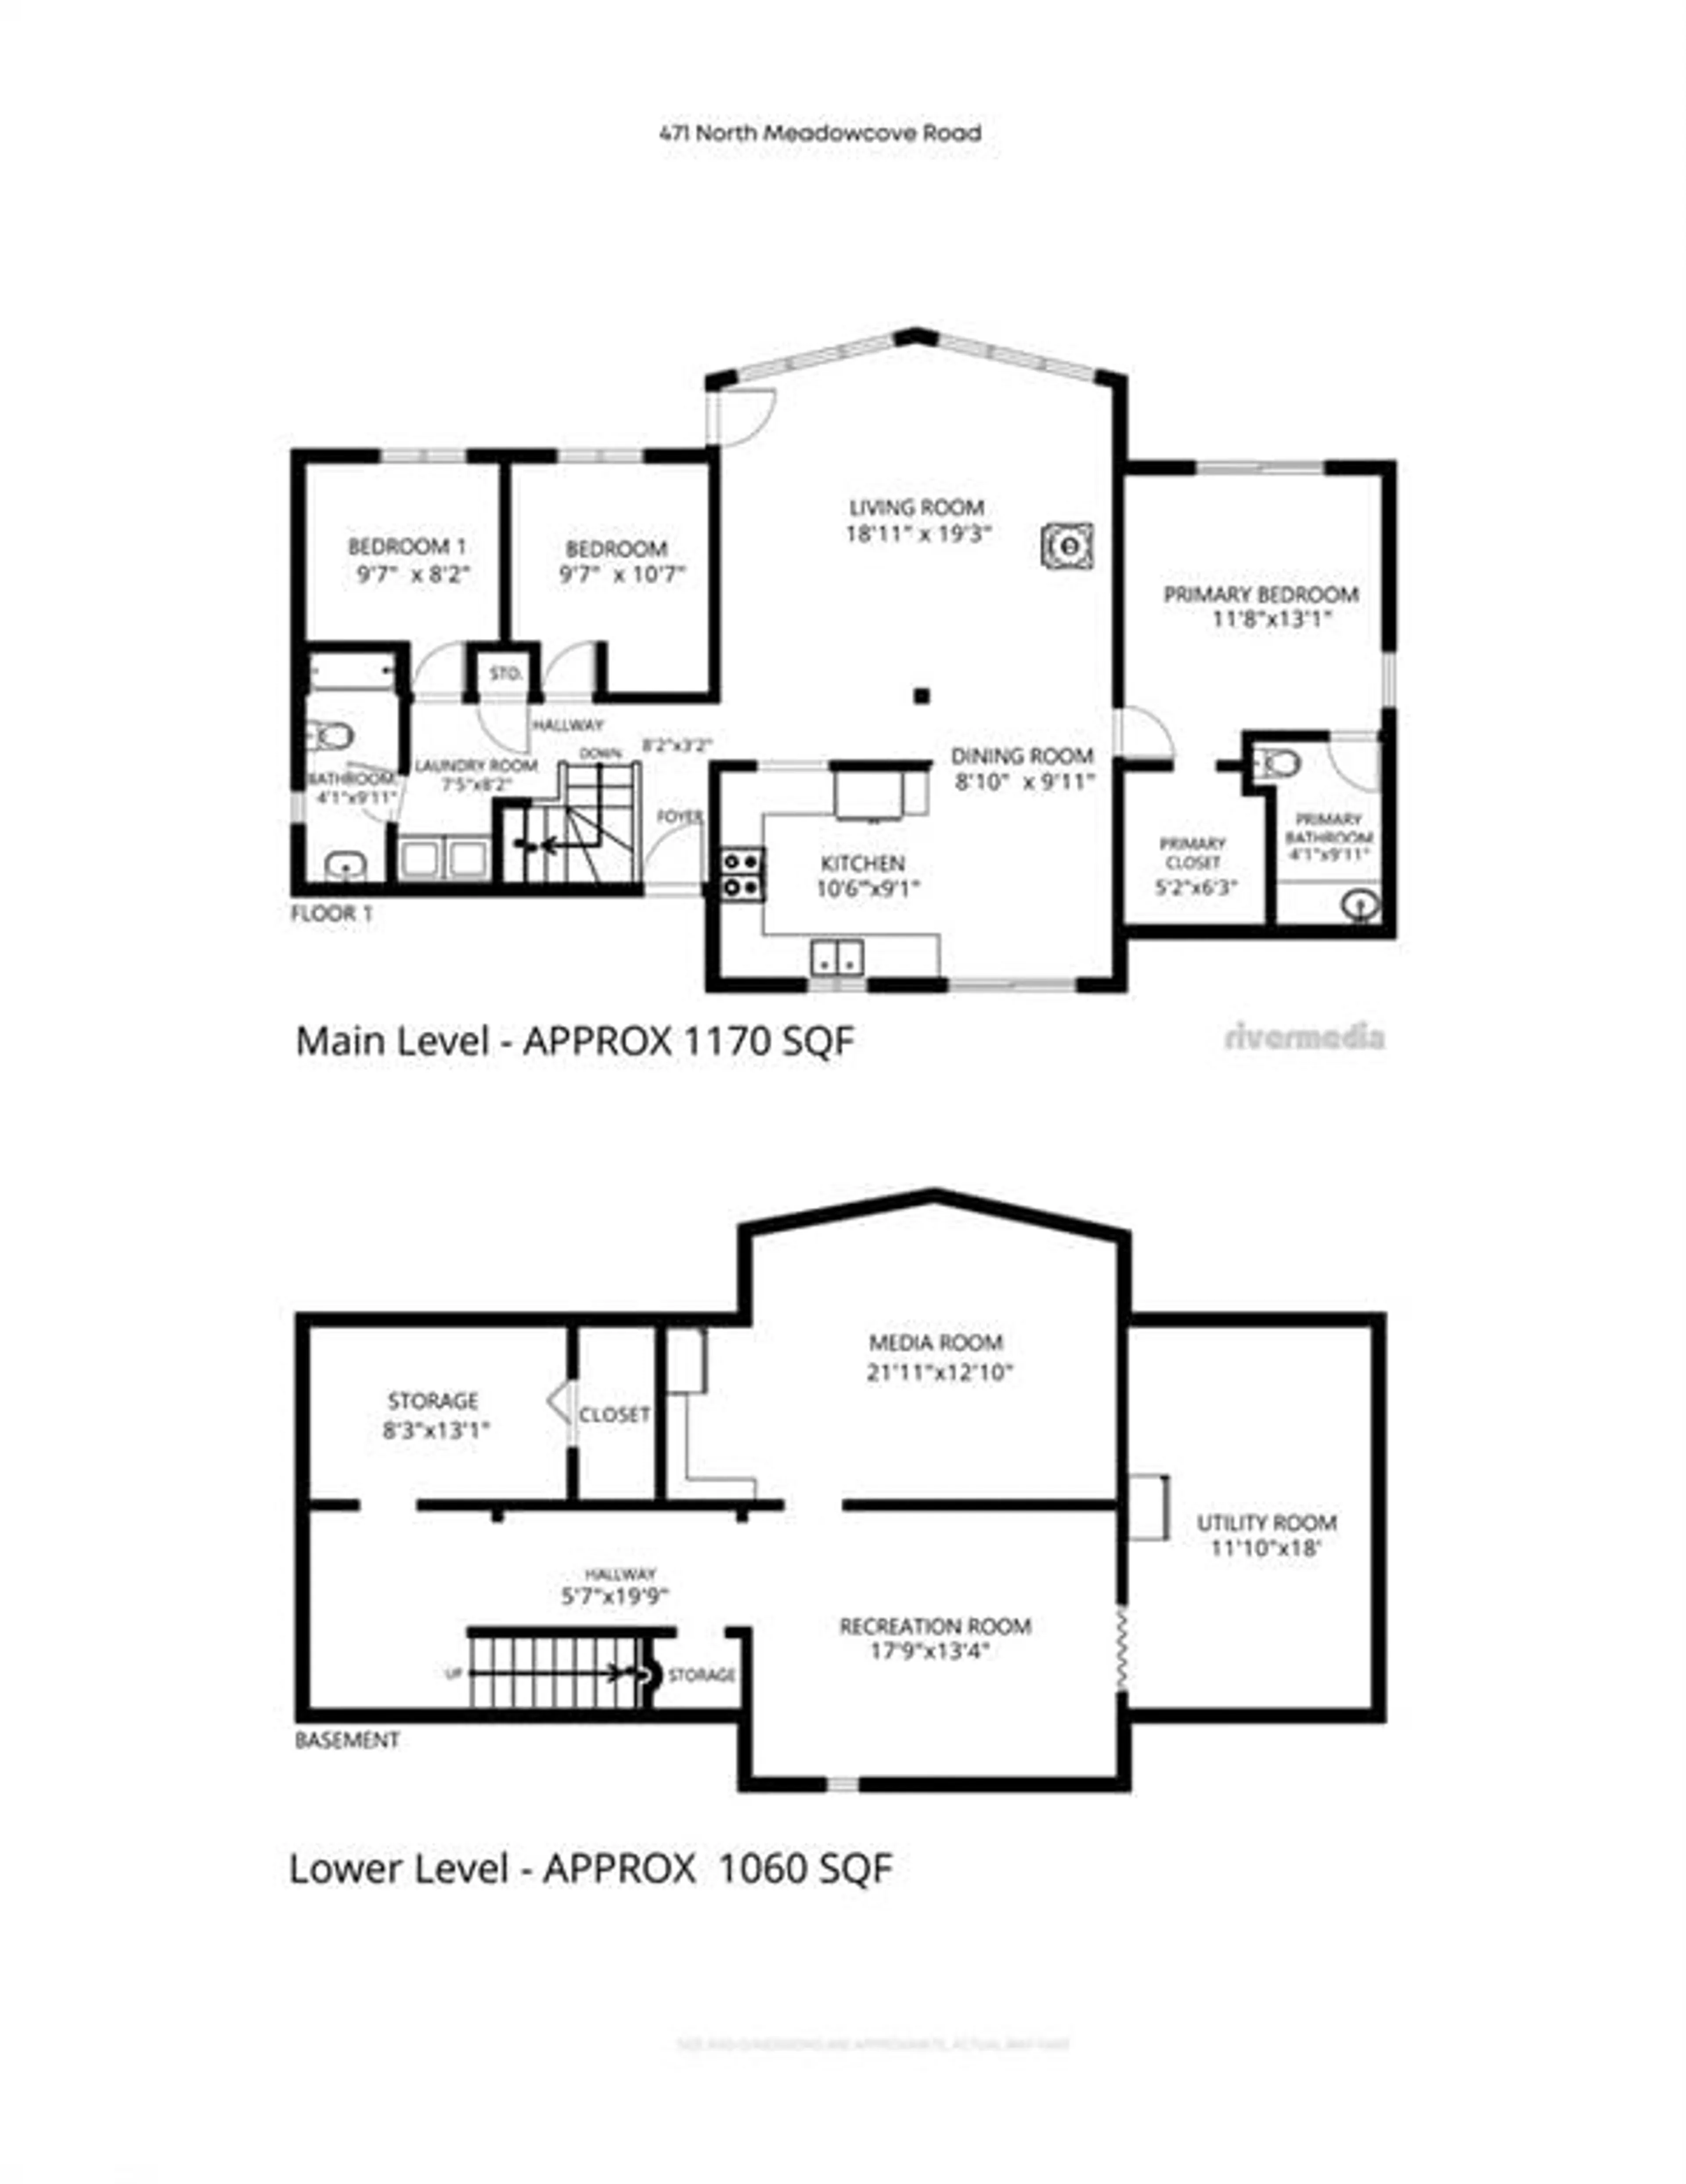 Floor plan for 471 North Meadowcove Rd, Dunchurch Ontario P0A 1G0